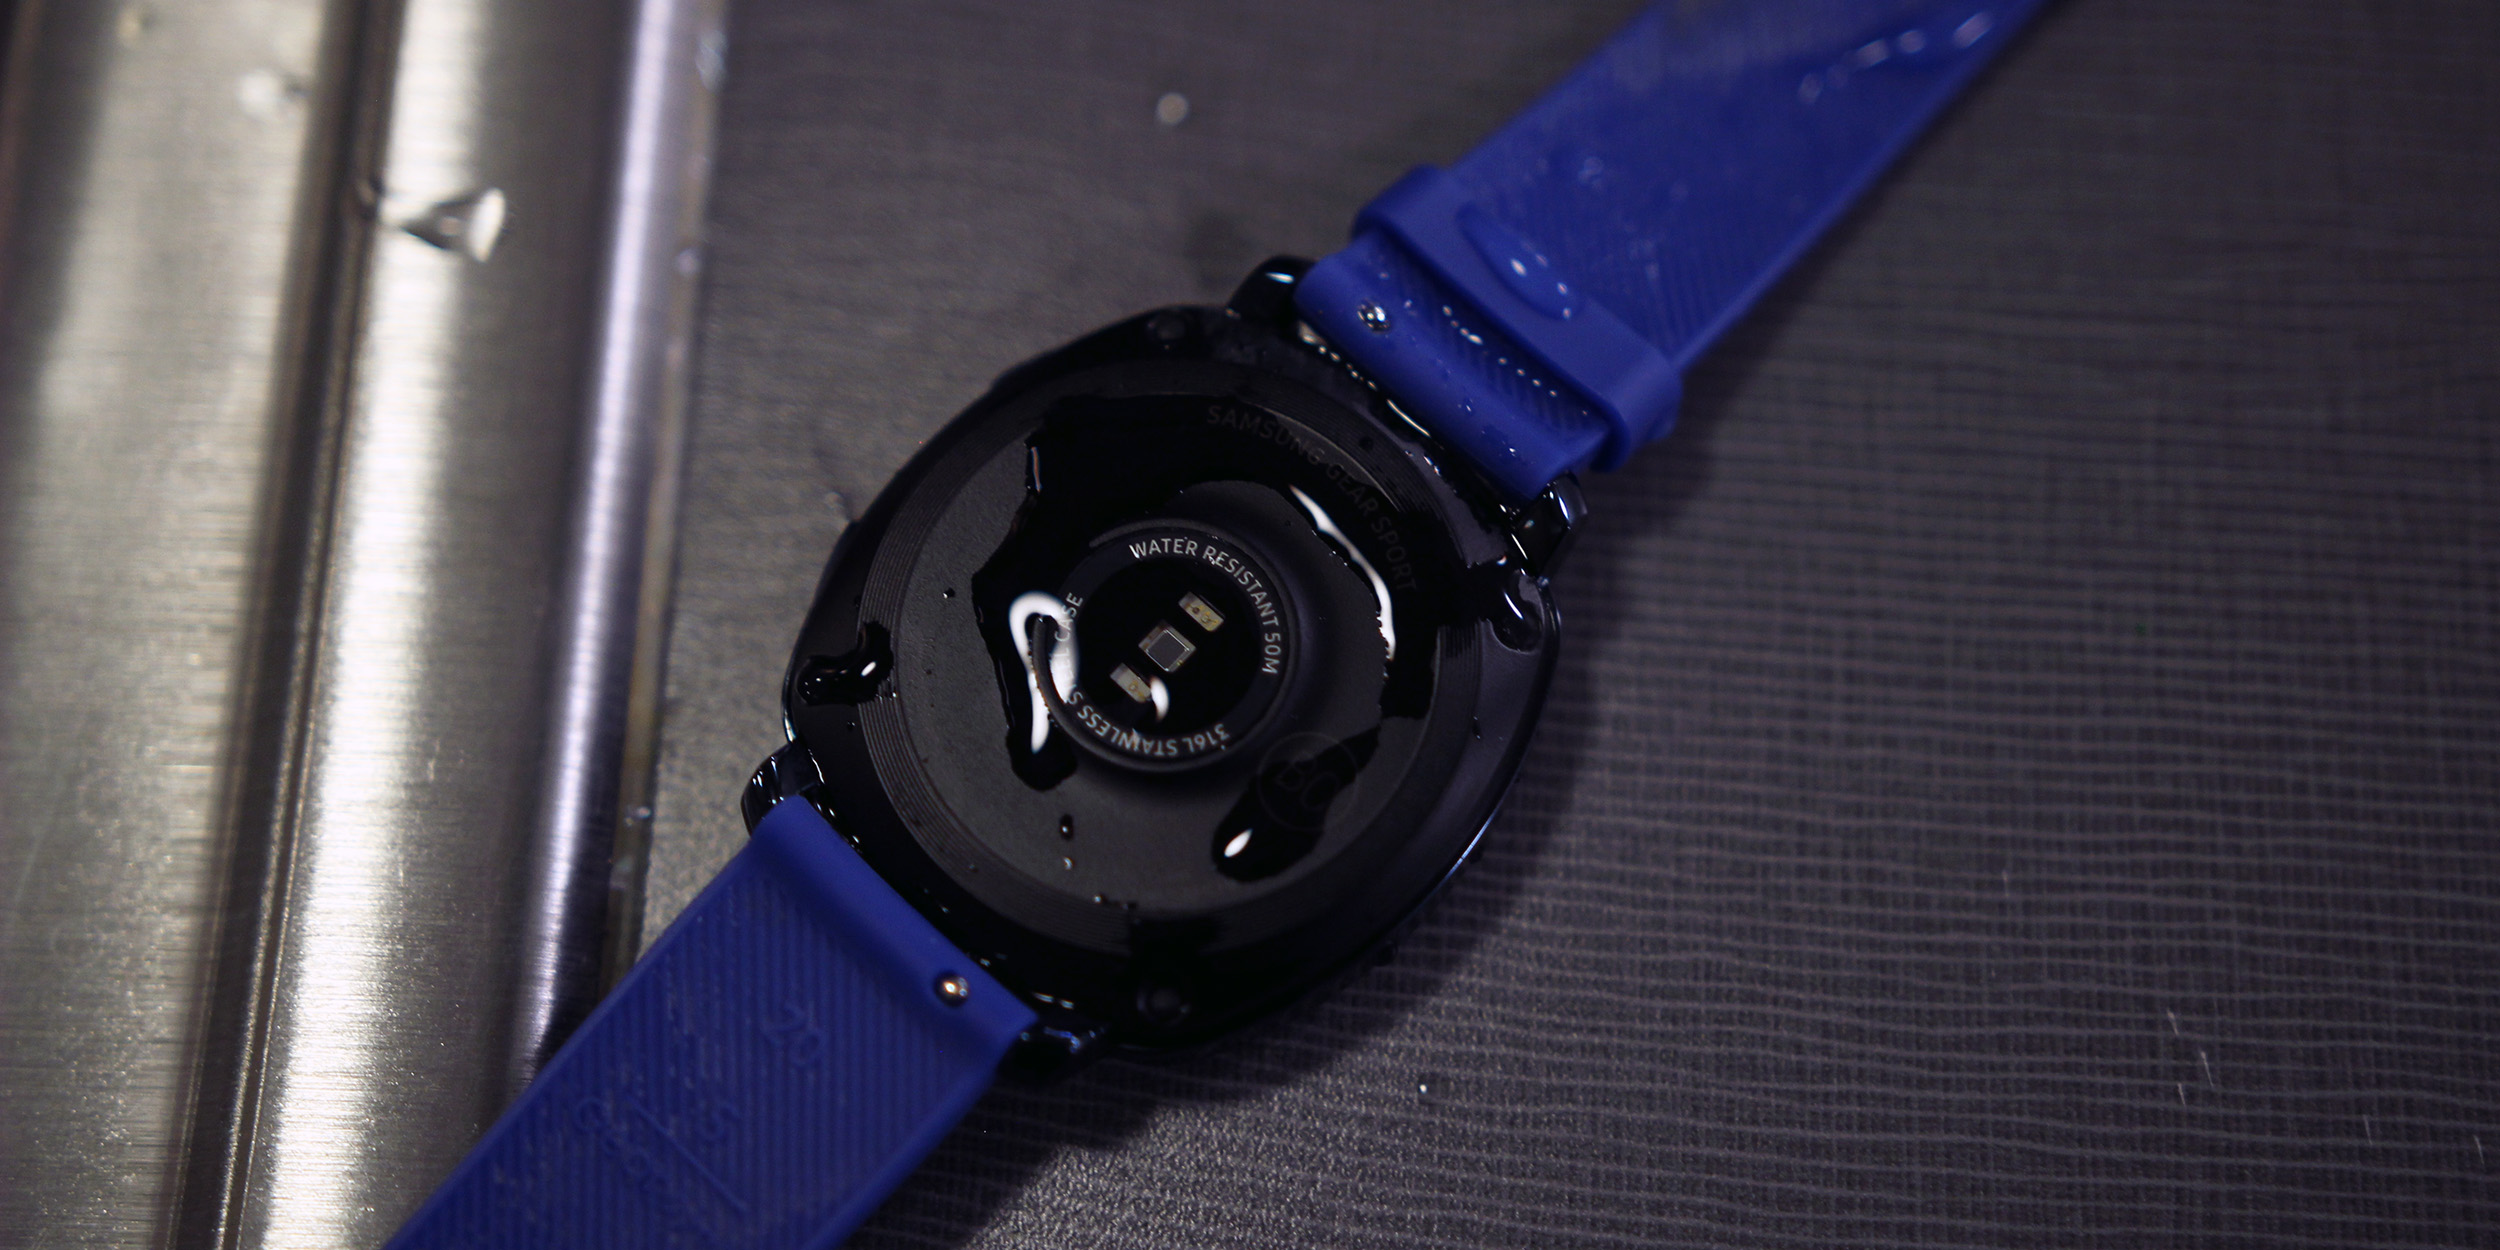 Review: The Gear Sport is probably the best smartwatch you can buy for - 9to5Google